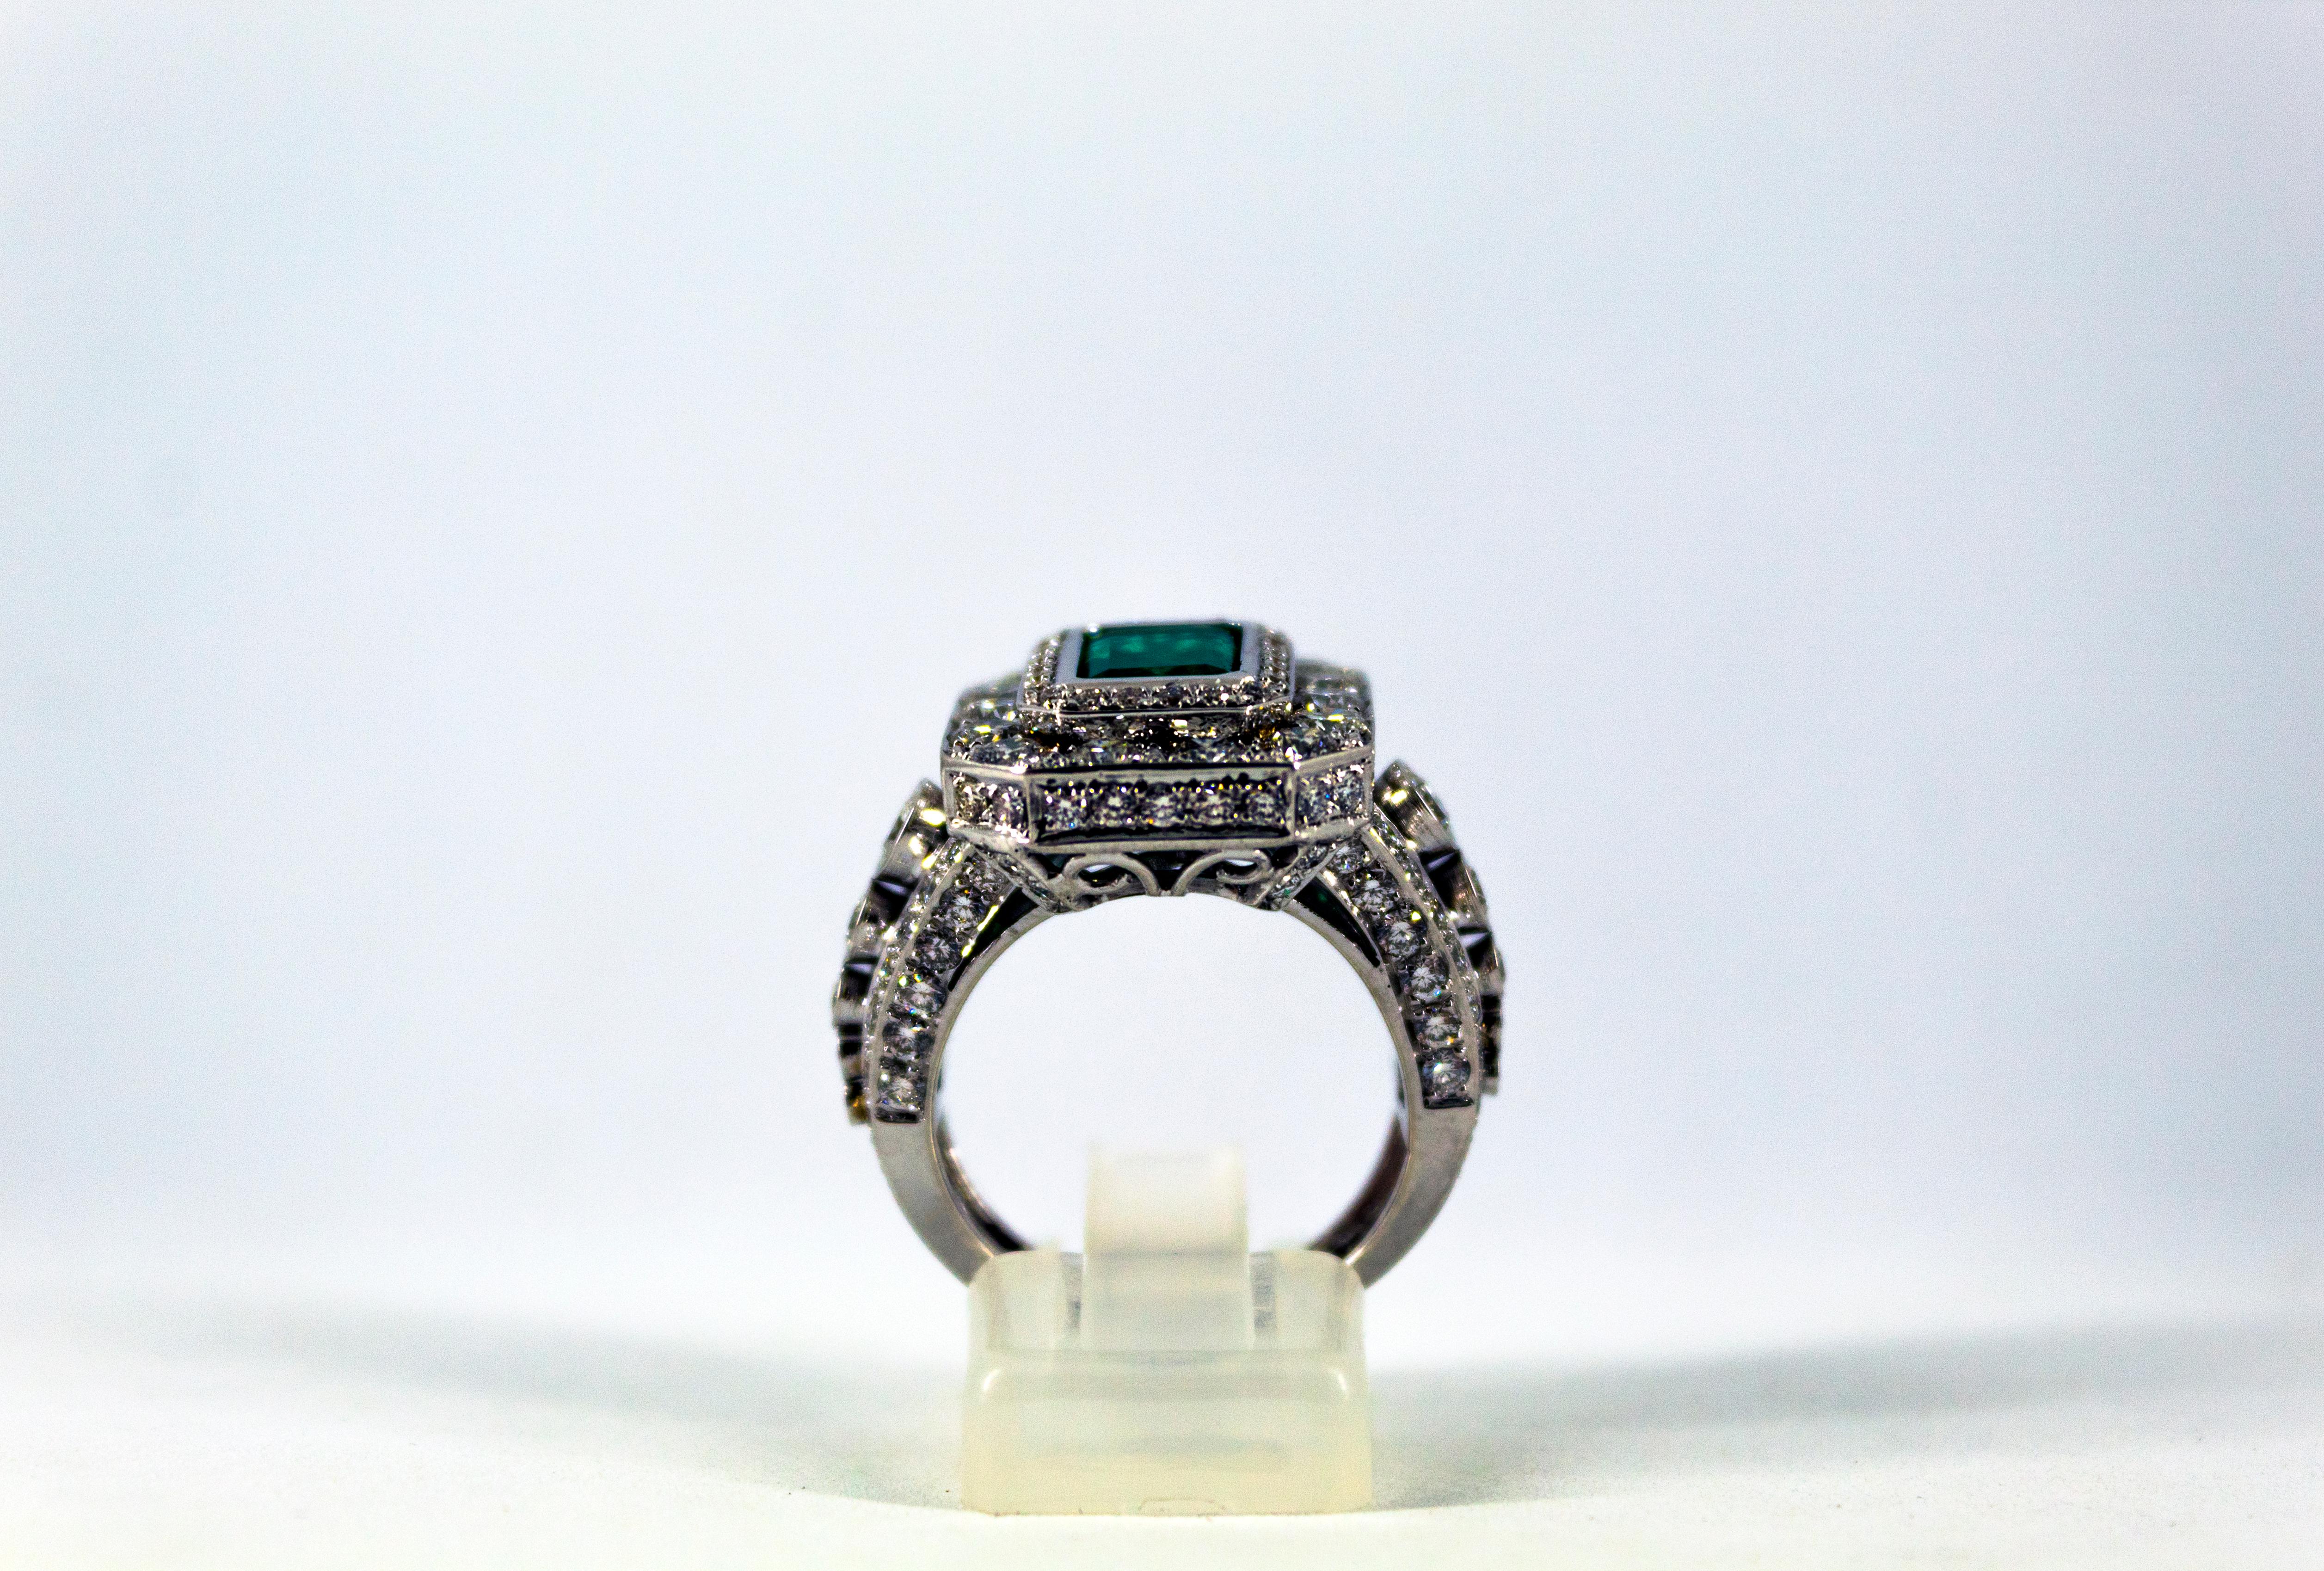 This Ring is made of 18K White Gold.
This Ring has 3.52 Carats of White Diamonds.
This Ring has a 3.05 Carats Colombia Emerald.
This Ring is inspired by Art Deco.
Size ITA: 14 USA: 7
We're a workshop so every piece is handmade, customizable and